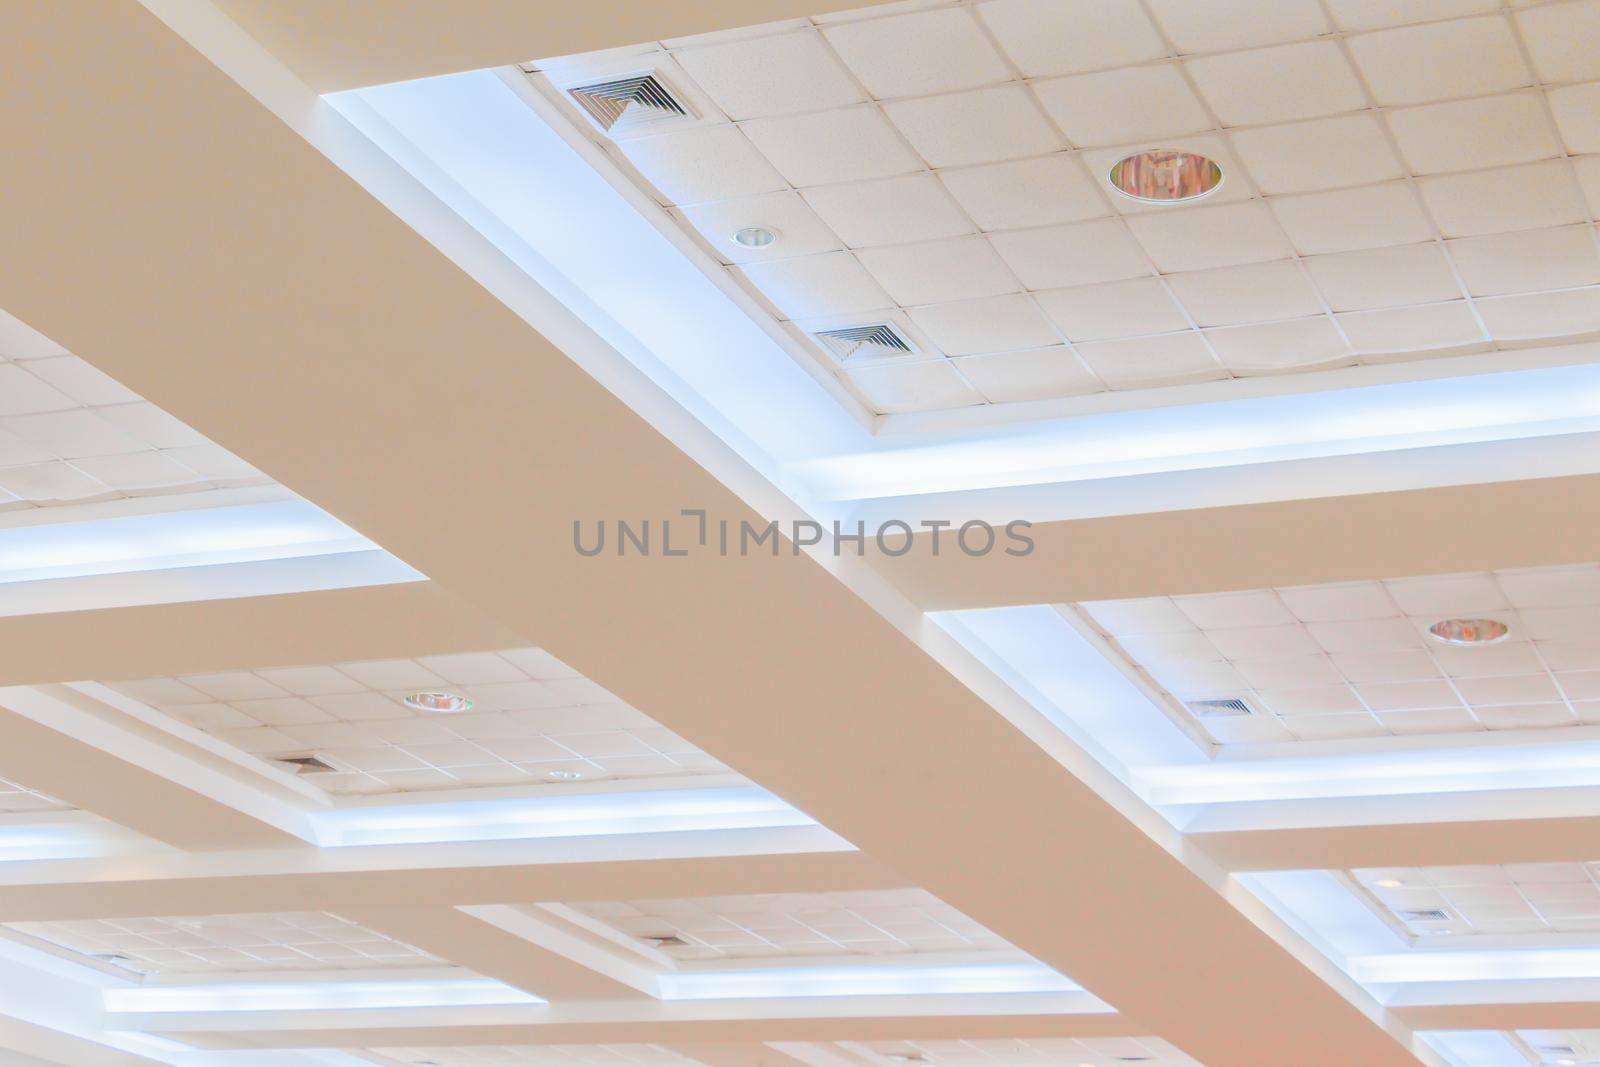 ceiling gypsum of business interior office building and light neon. style monochrome with copy space add text